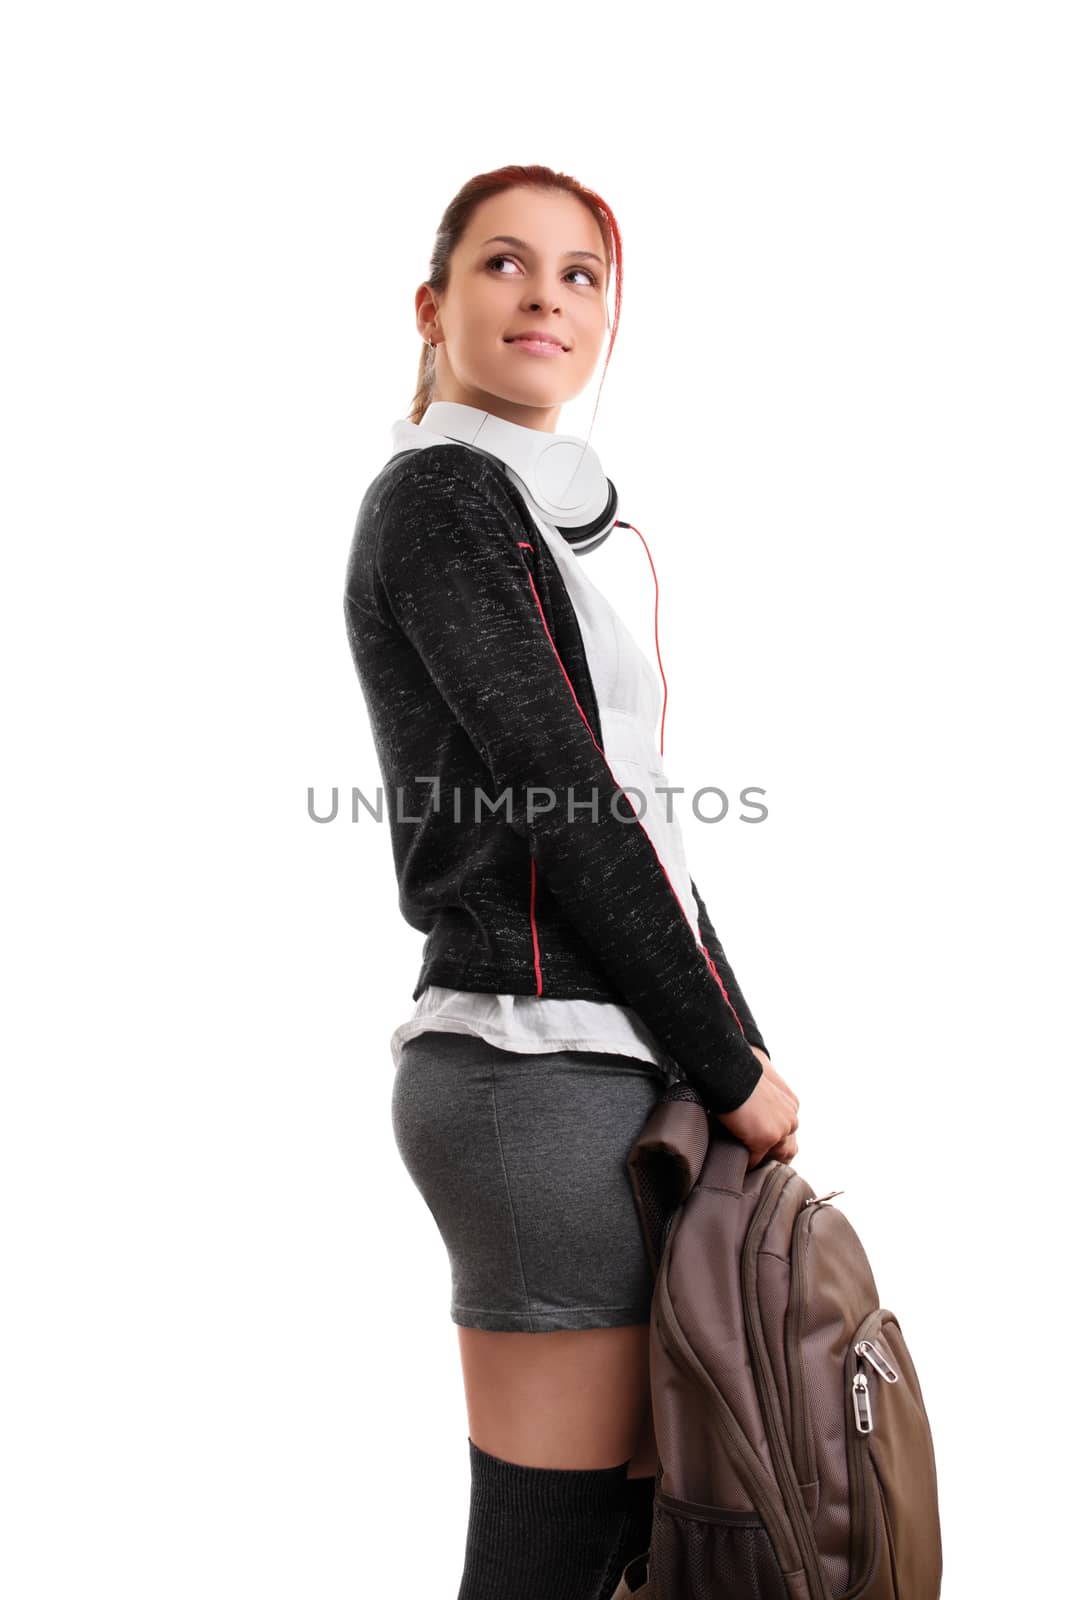 A portrait of a smiling female student in uniform with headphones, holding a backpack, isolated on white background. I can't wait to go back to school.